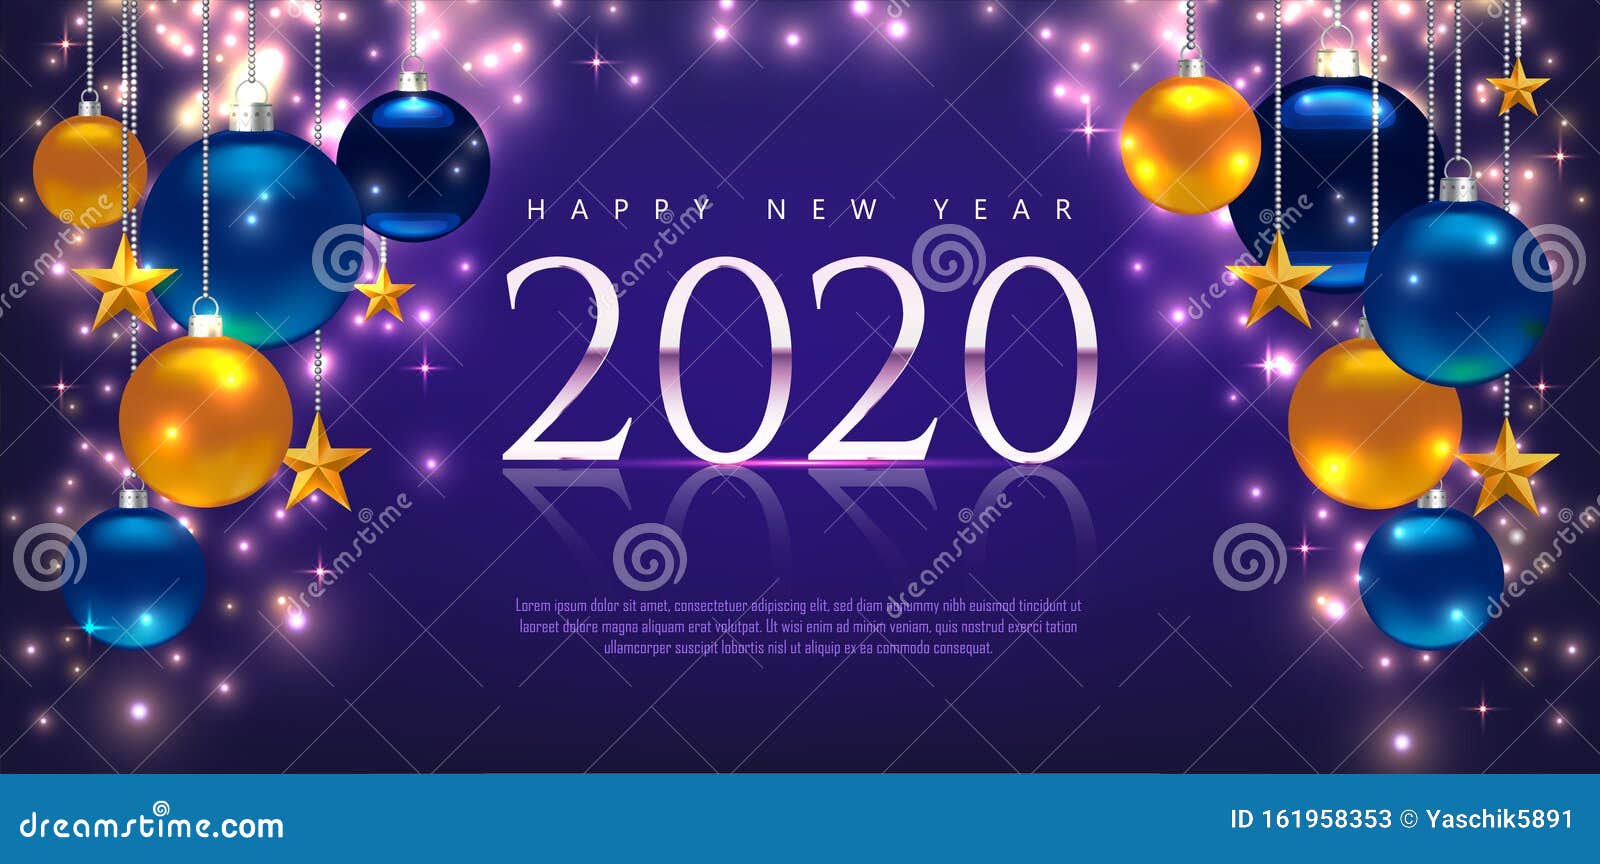 Magic Template with Greeting Happy New Year 2020. Template for ...